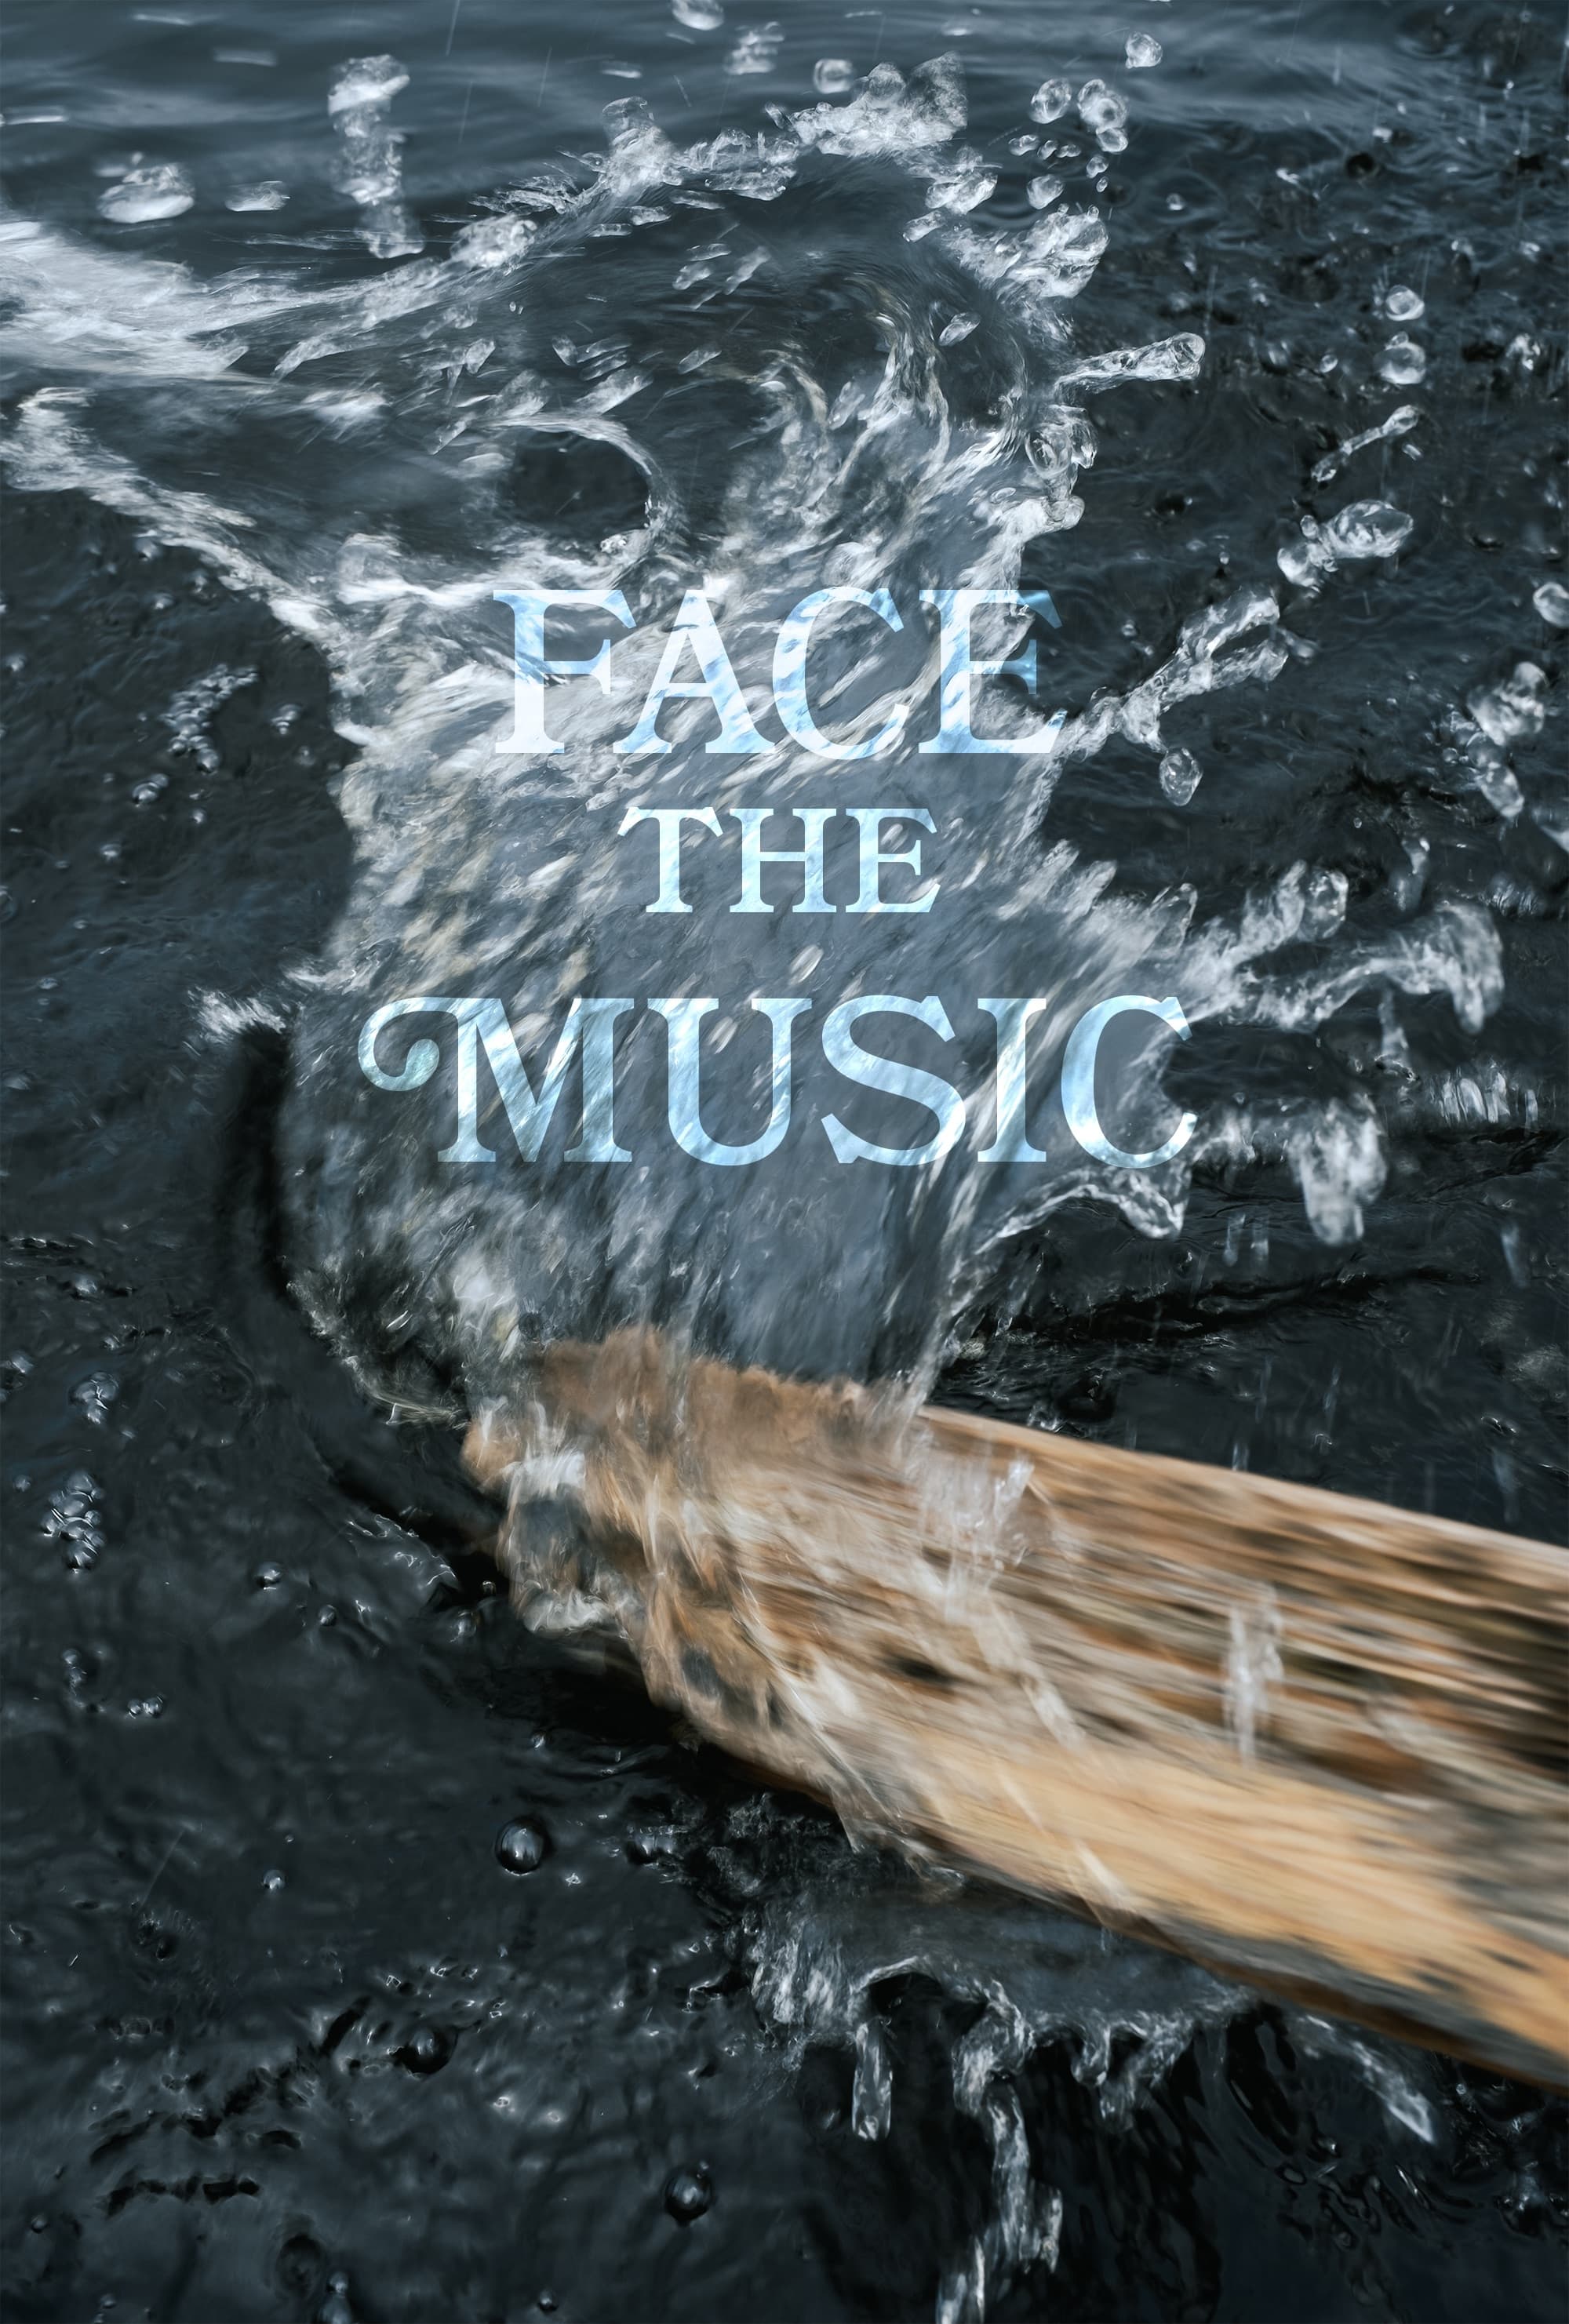 Face the Music